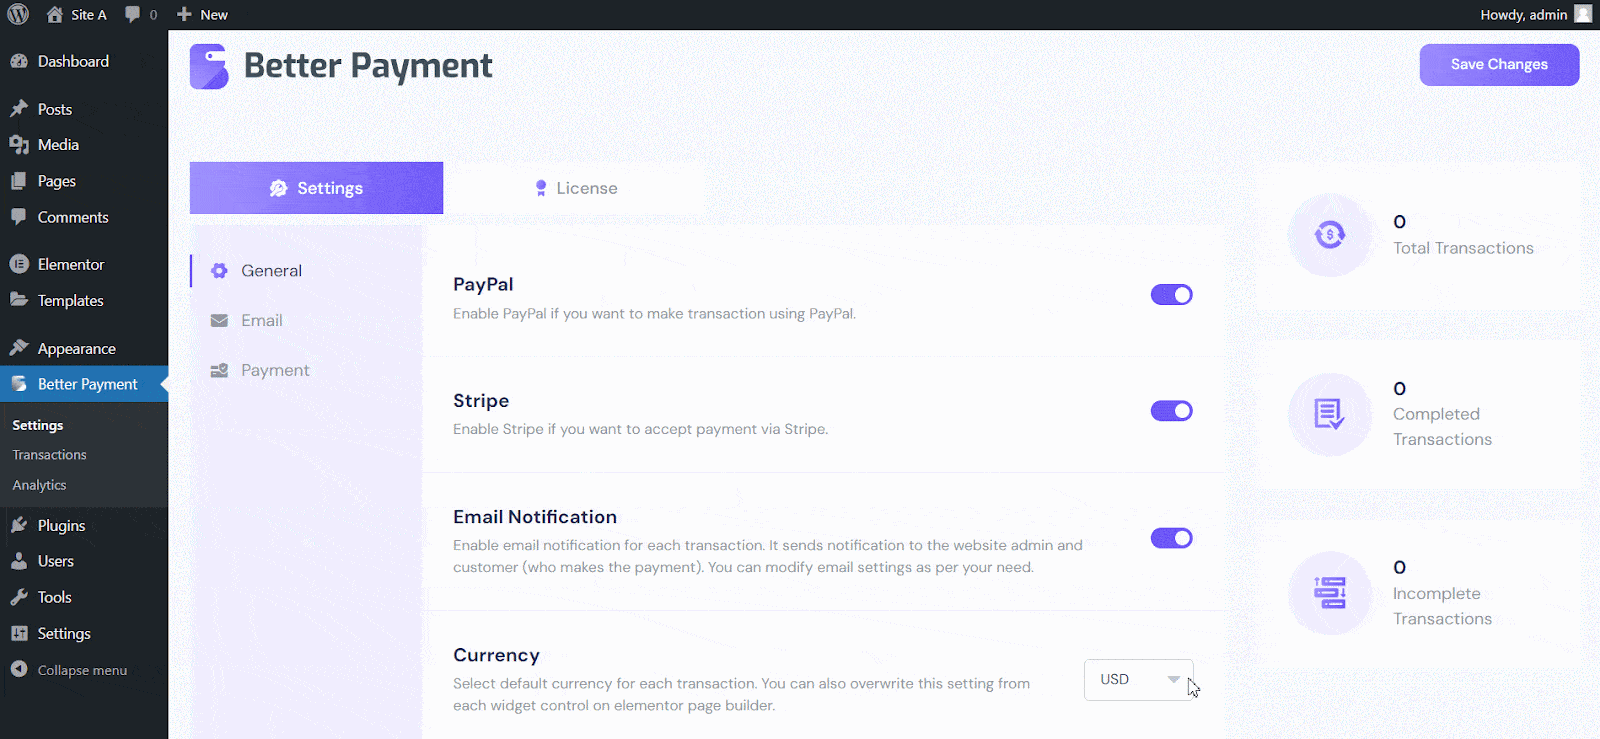 Set Up Multiple Currencies in Better Payment